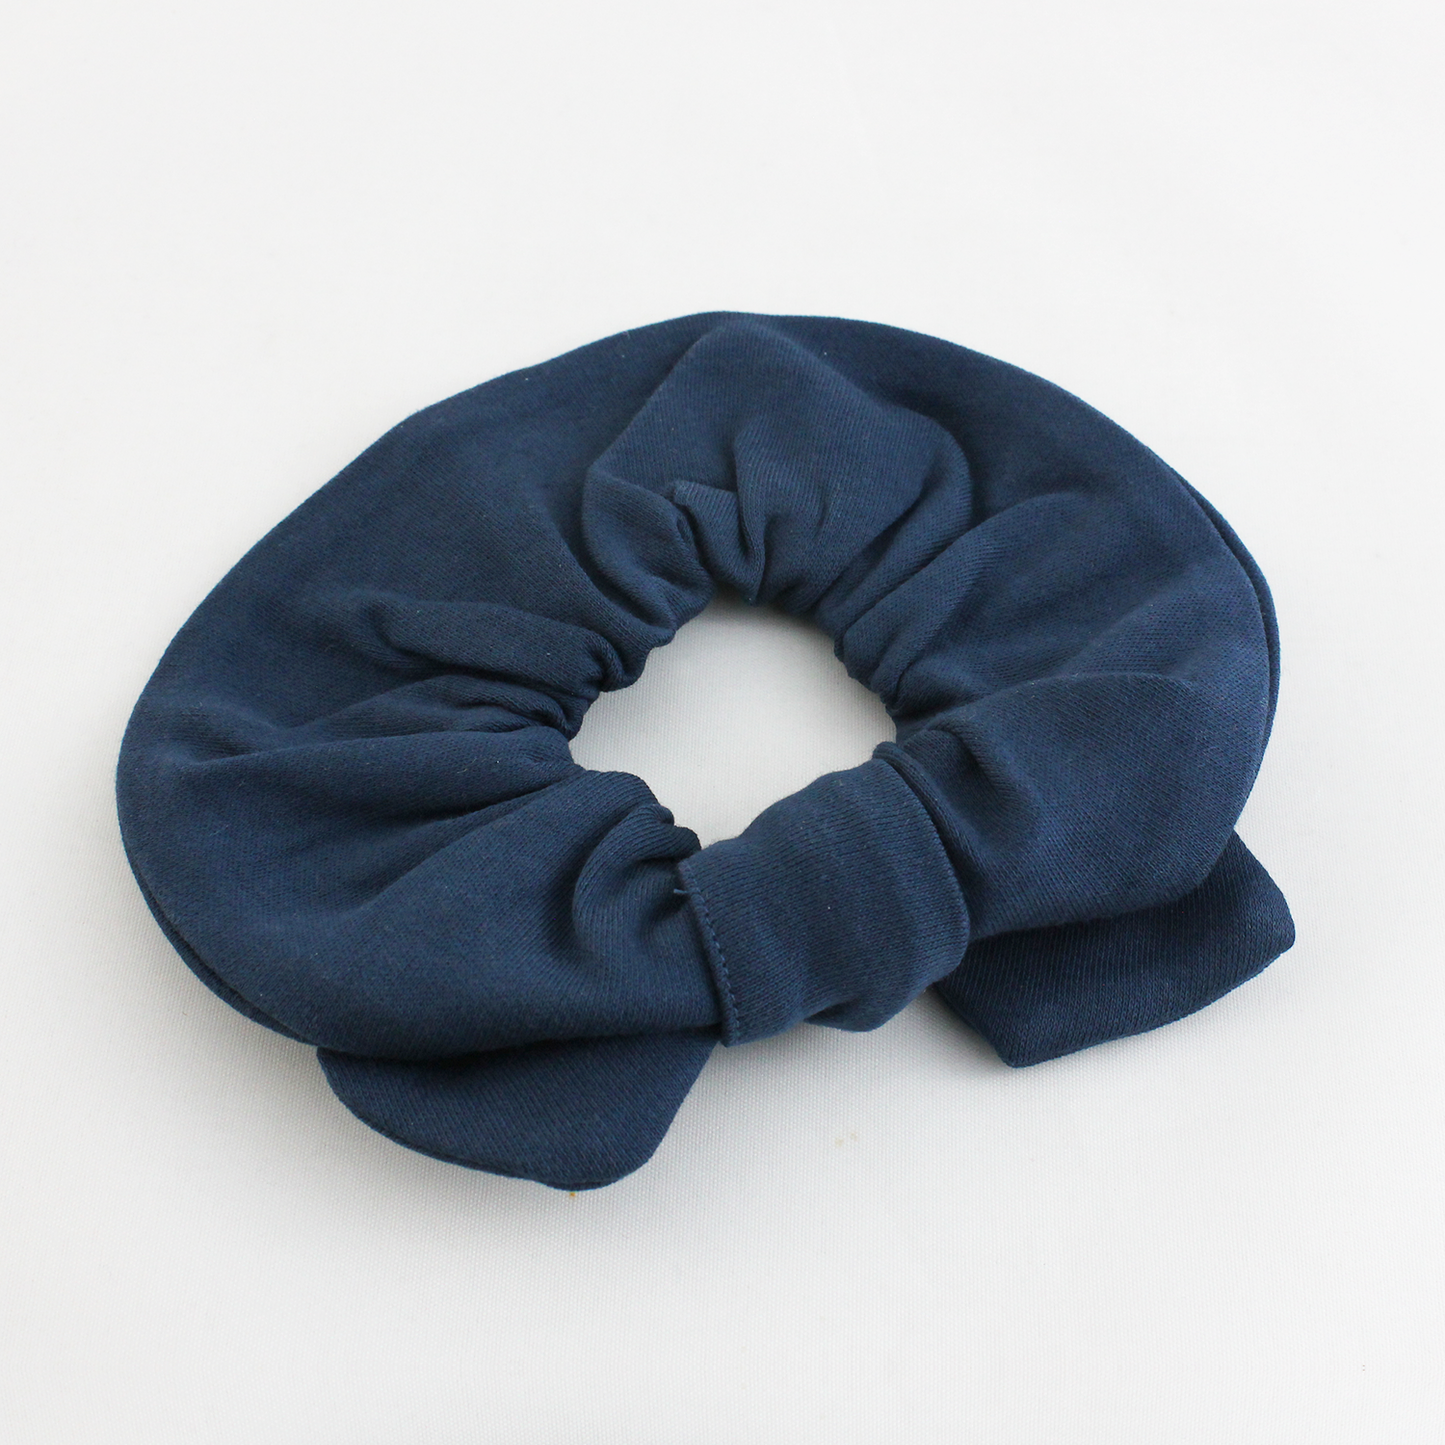 Endanzoo Organic Cotton Scrunchies for Mom - Navy Blue